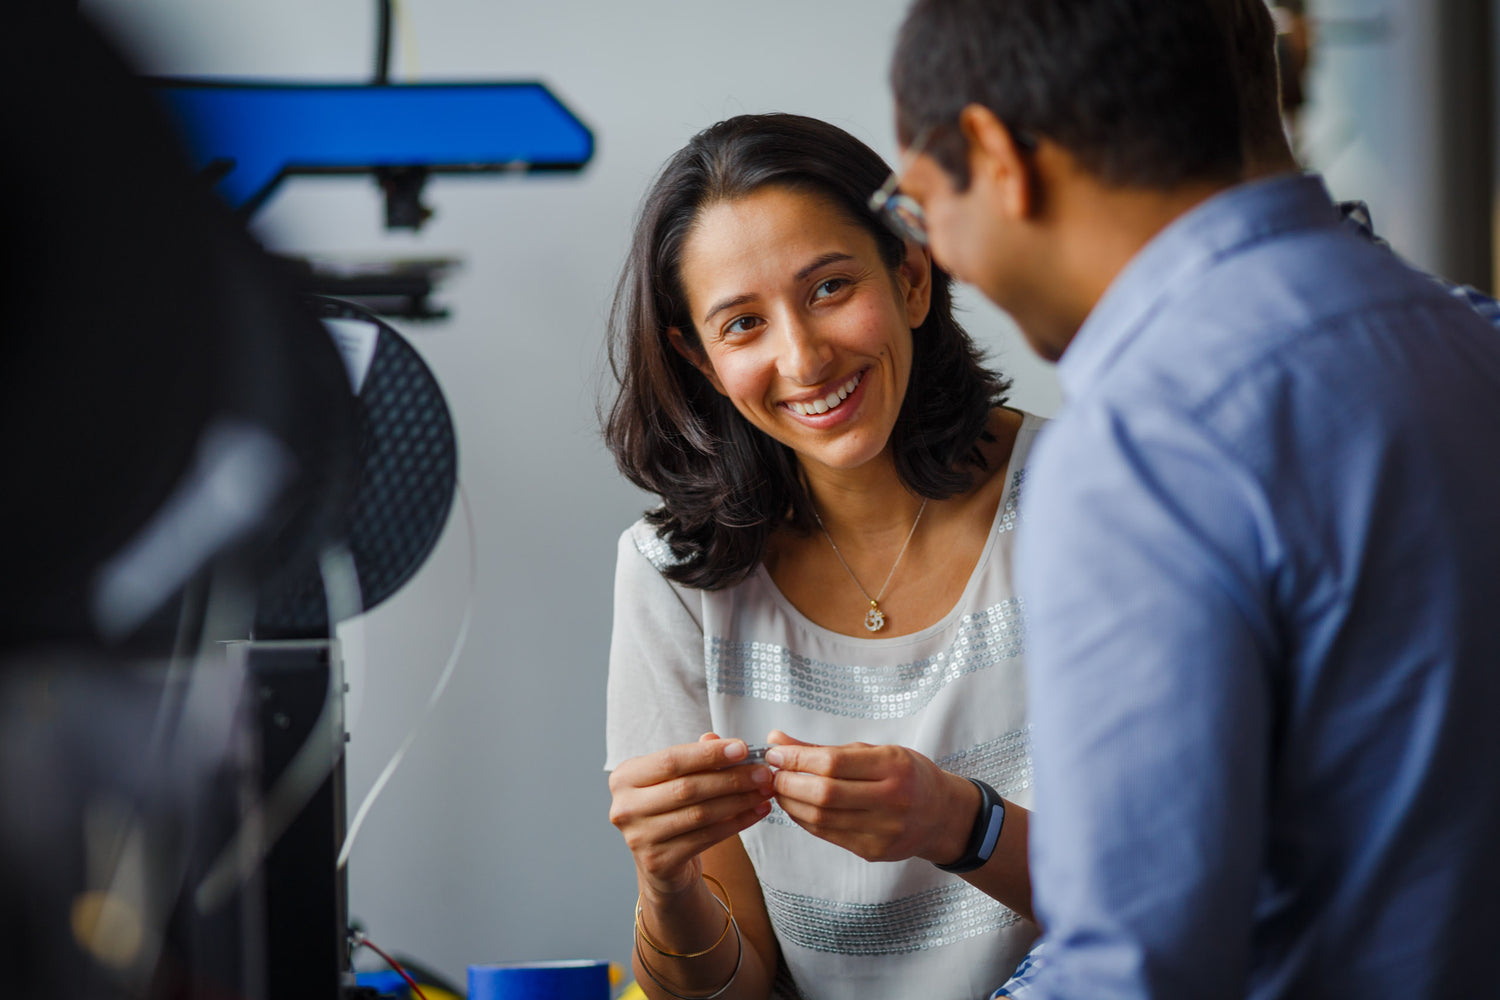 A man and woman in an office looking at a 3d printer.